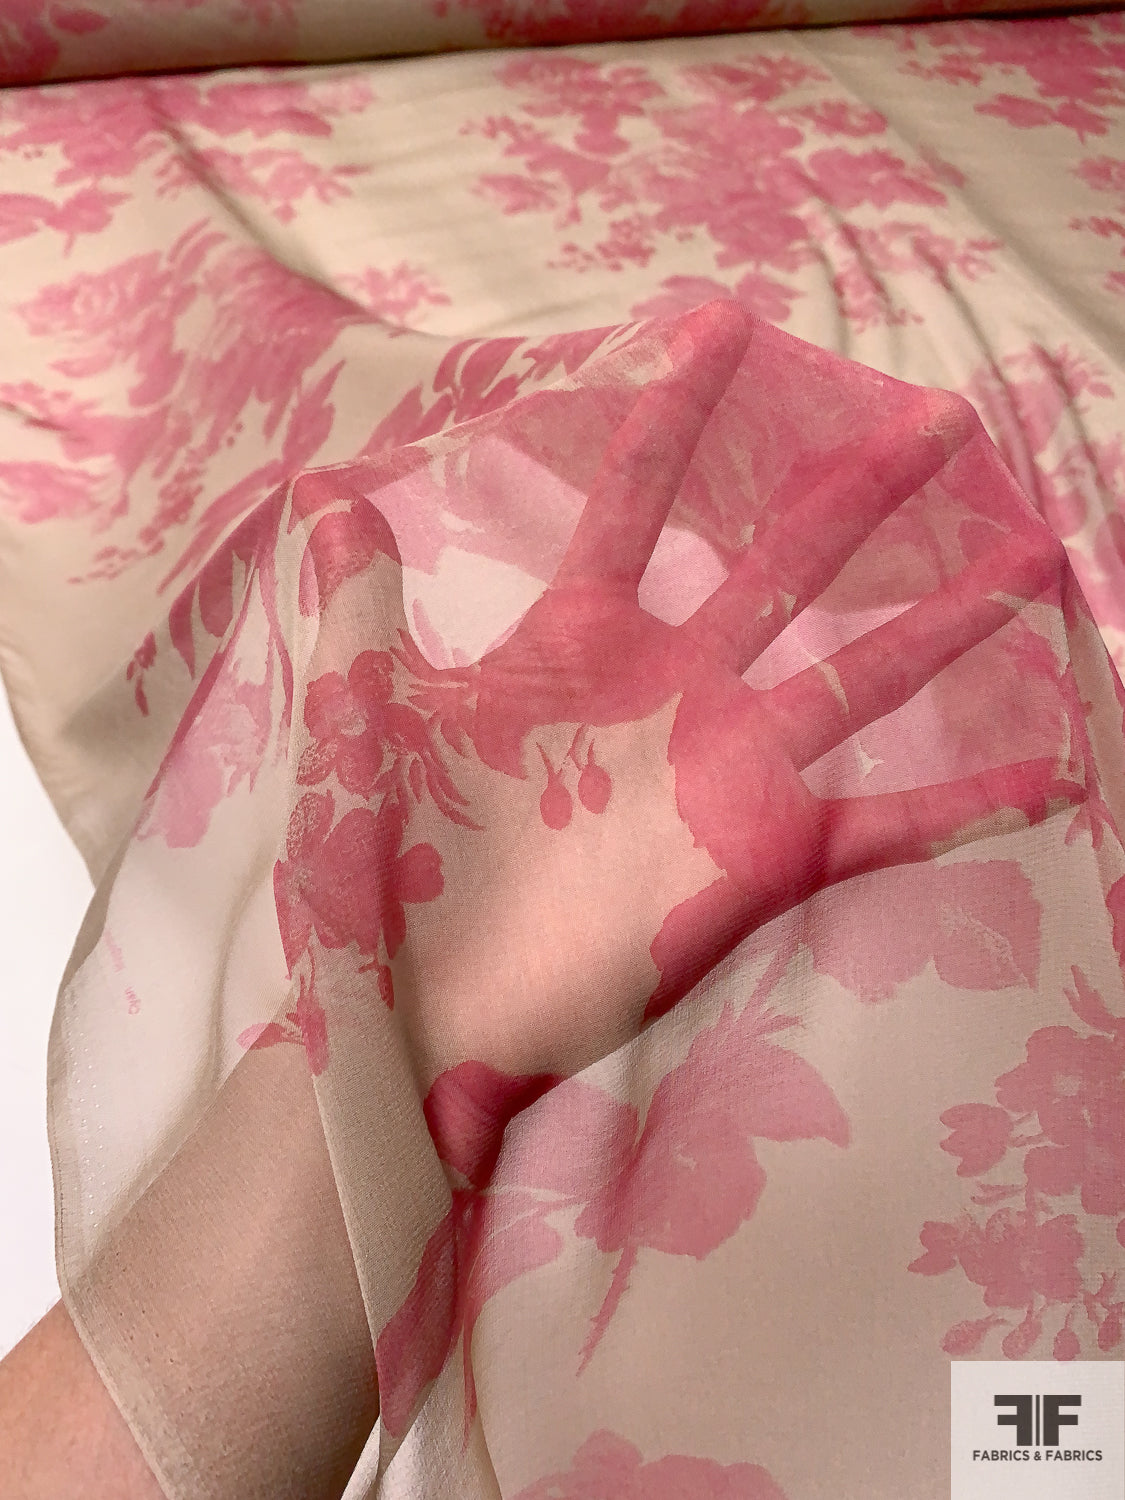 Large-Scale Floral Bouquets Printed Silk Chiffon - Berry Pink / Tan